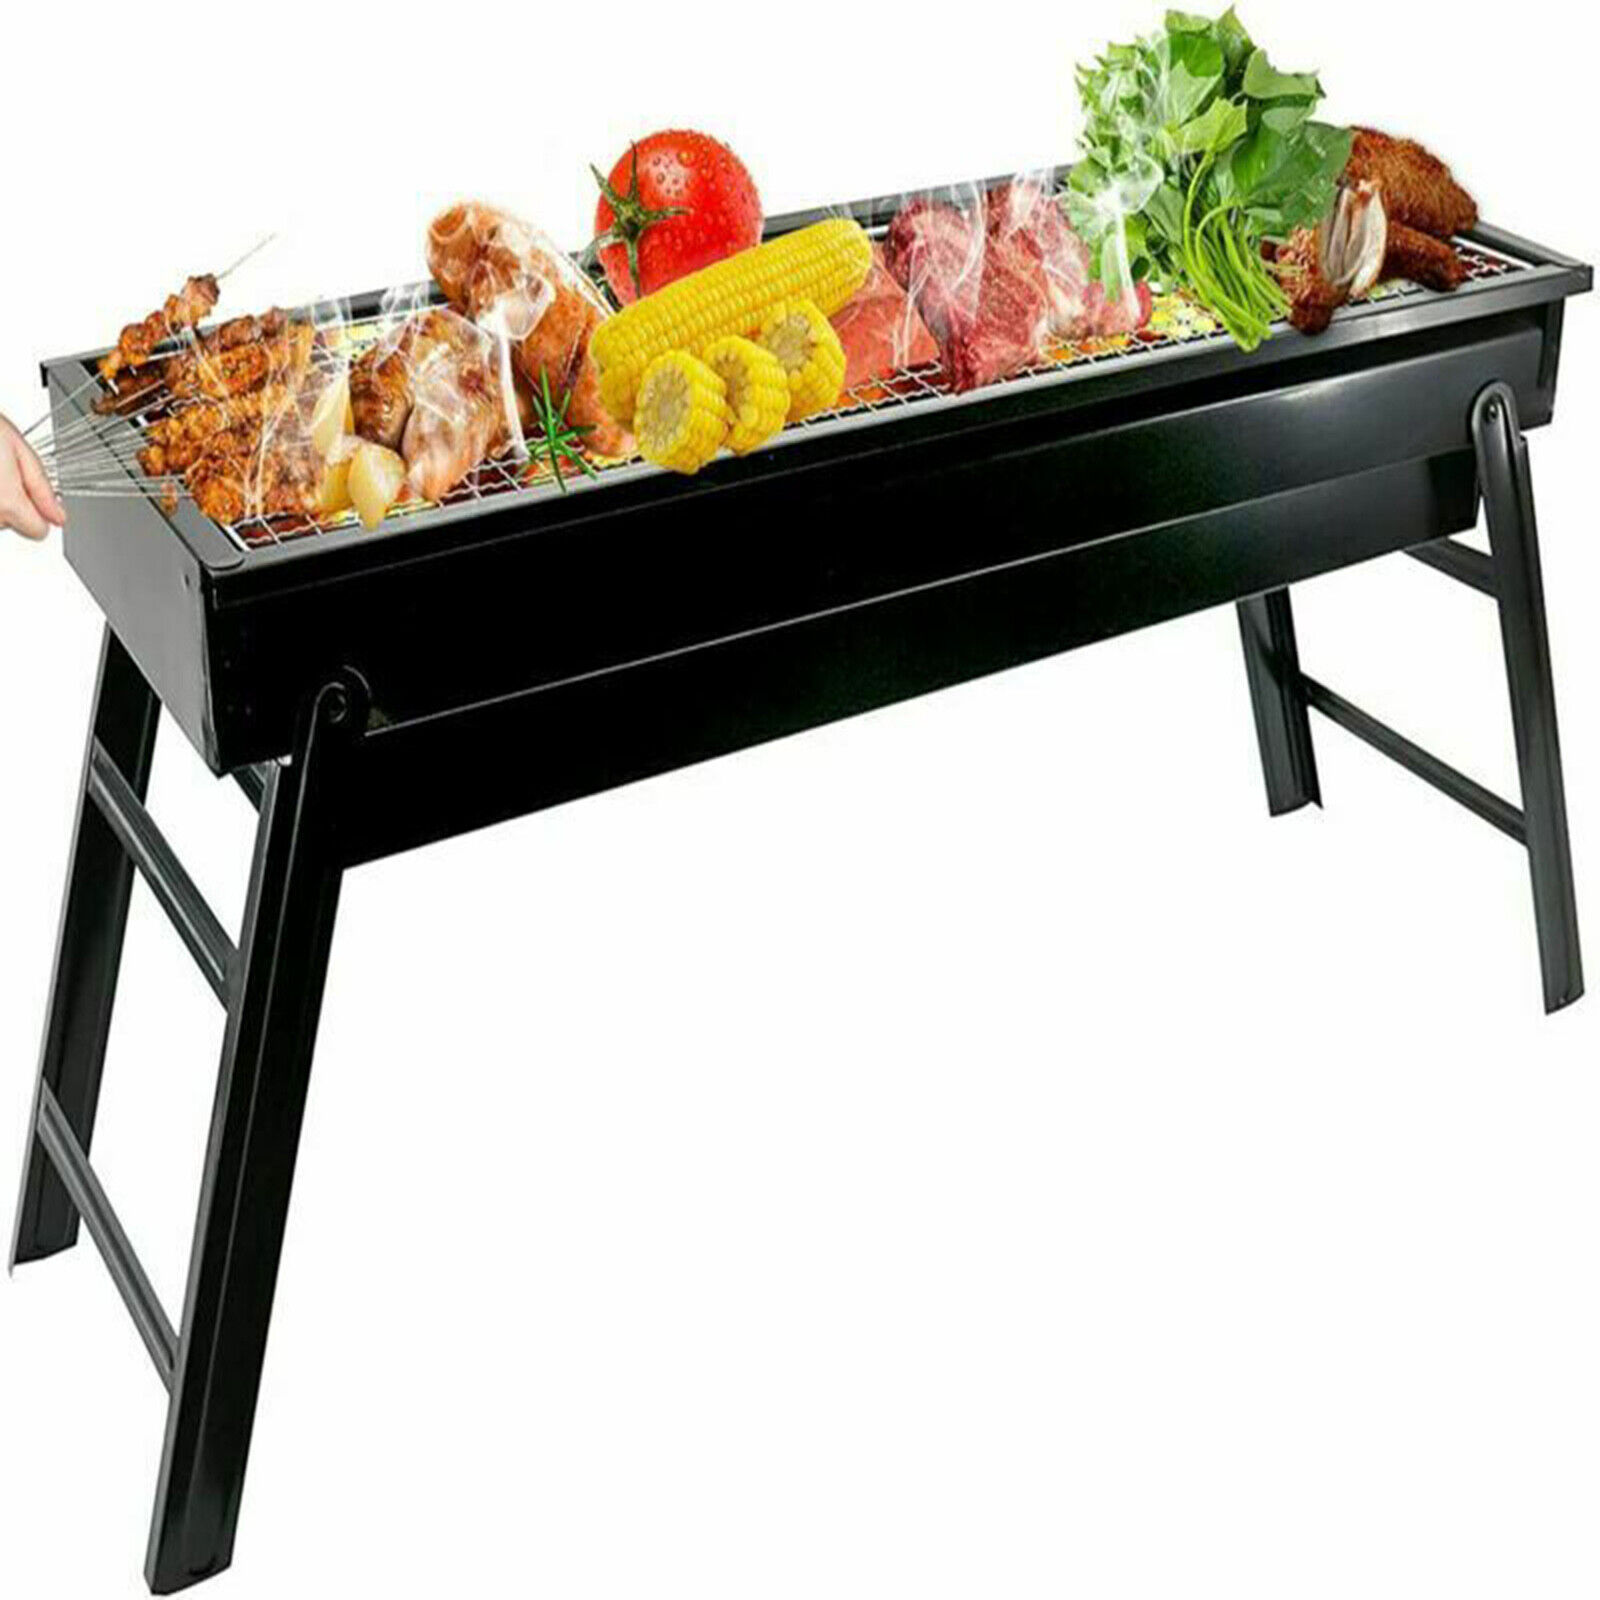 Charcoal Grill Portable Folding Grill Durable Metal Kebab Grill BBQ Grill